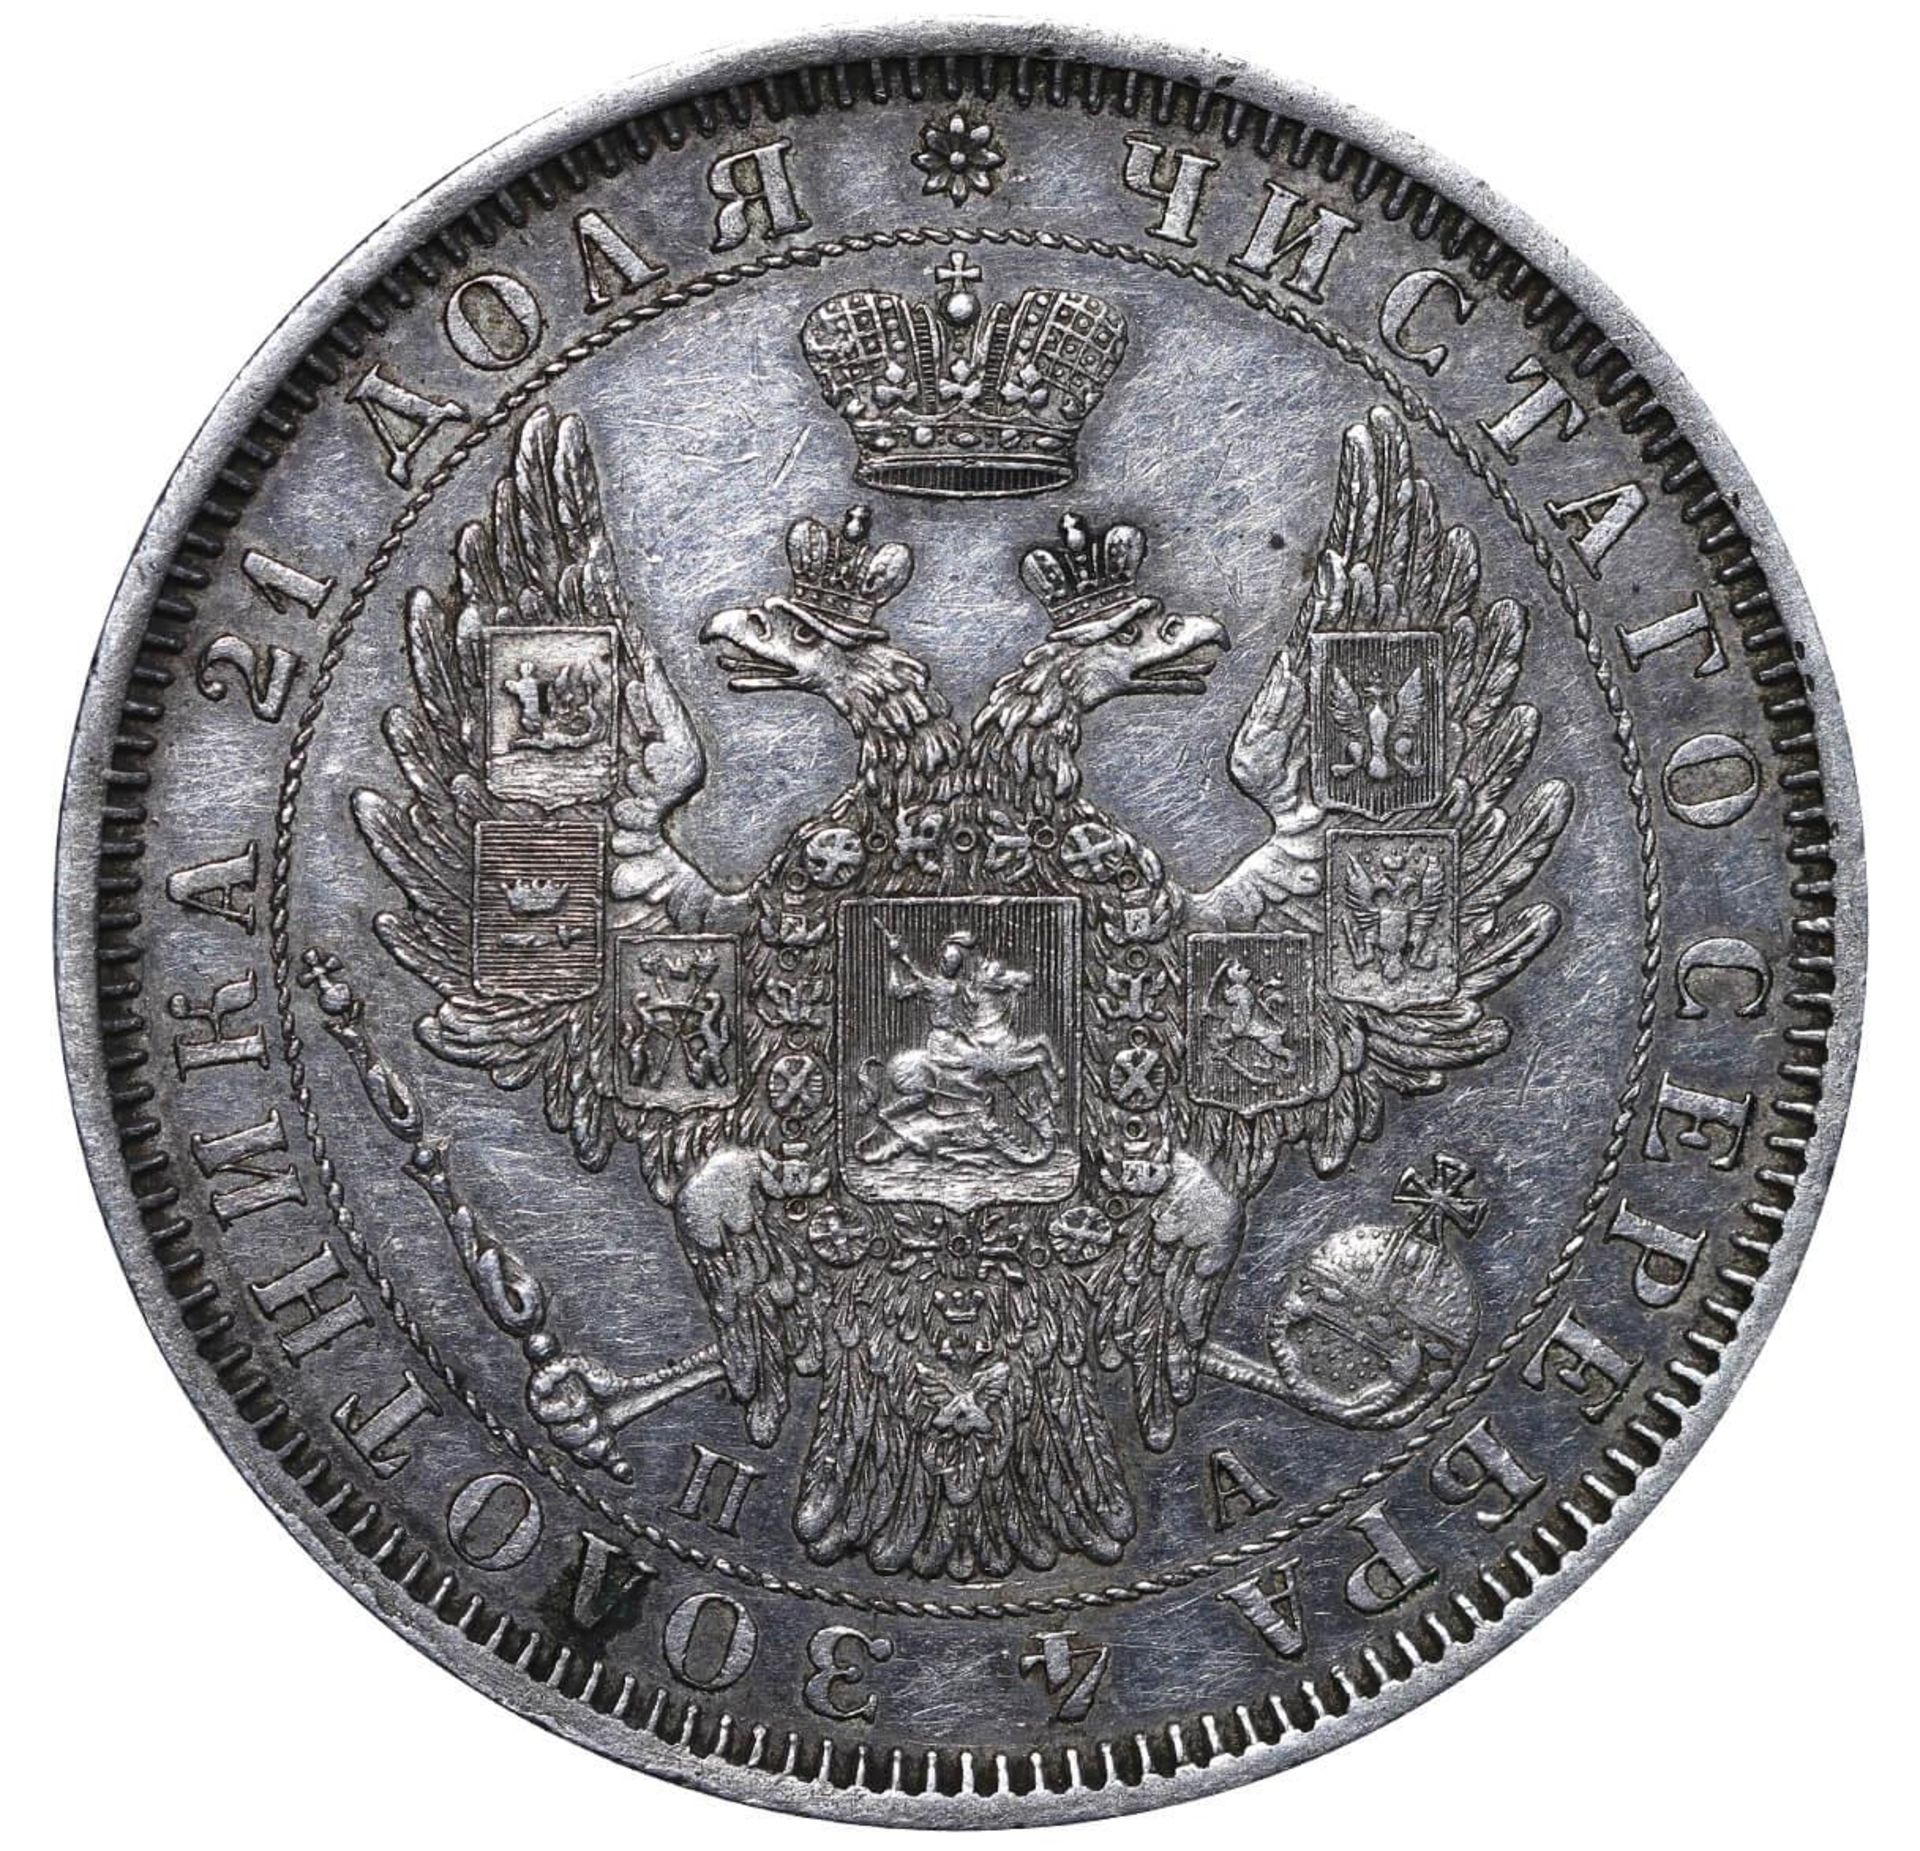 Russian Empire, 1 Rouble, 1851 year, SPB-PA - Image 3 of 3